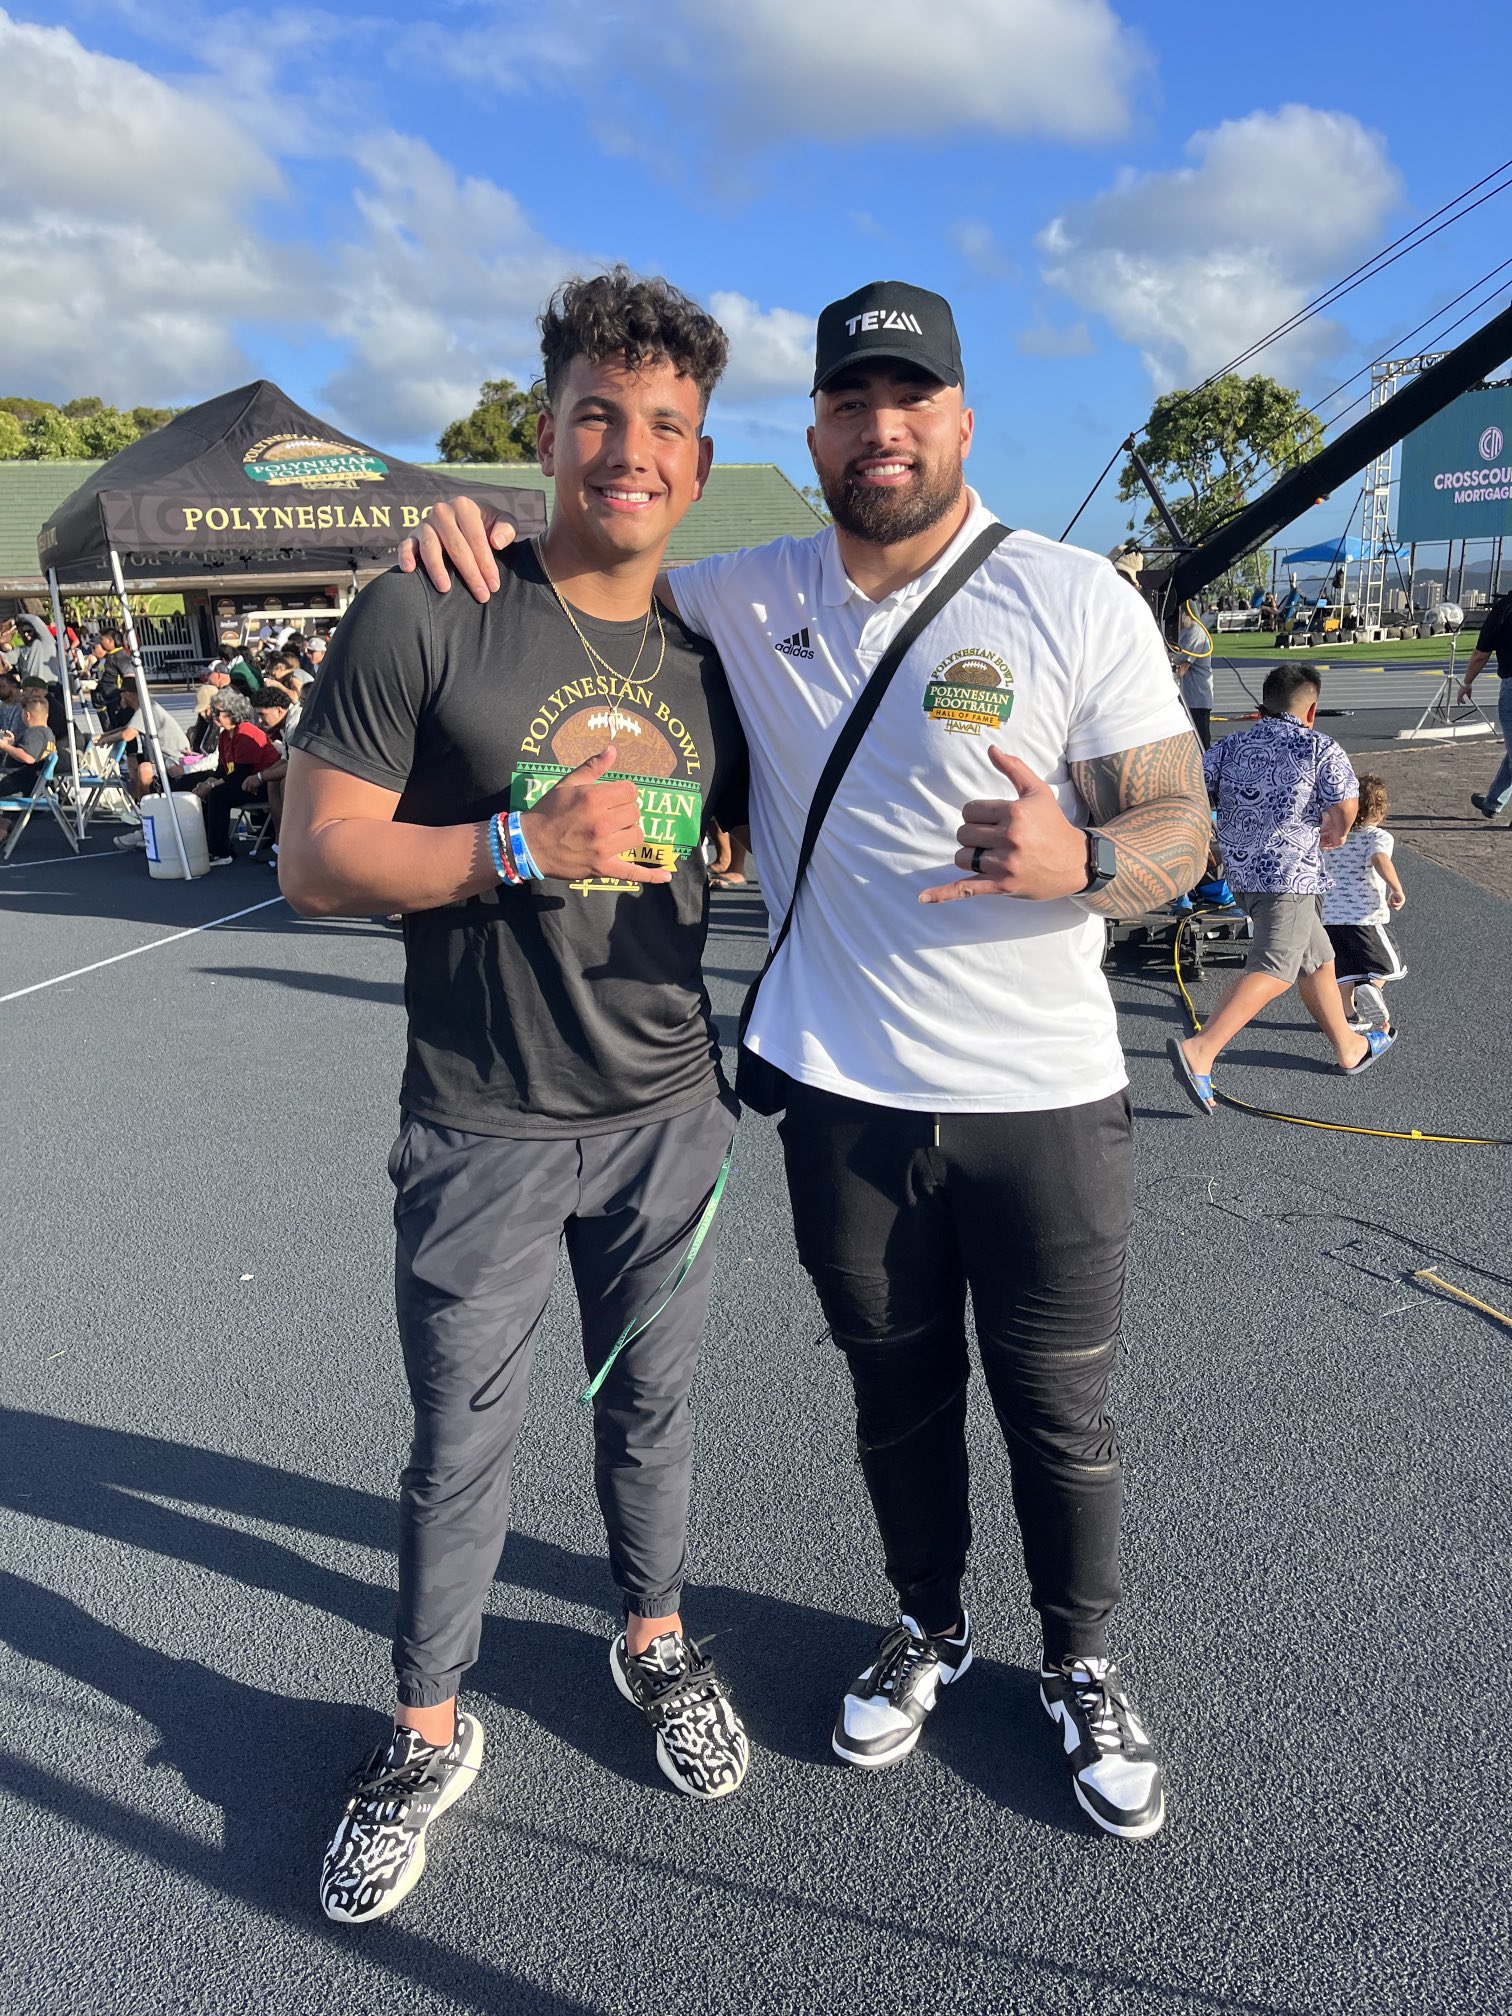 POLYNESIAN BOWL on Twitter "Manti Te’o and Class of 2024 1 ranked